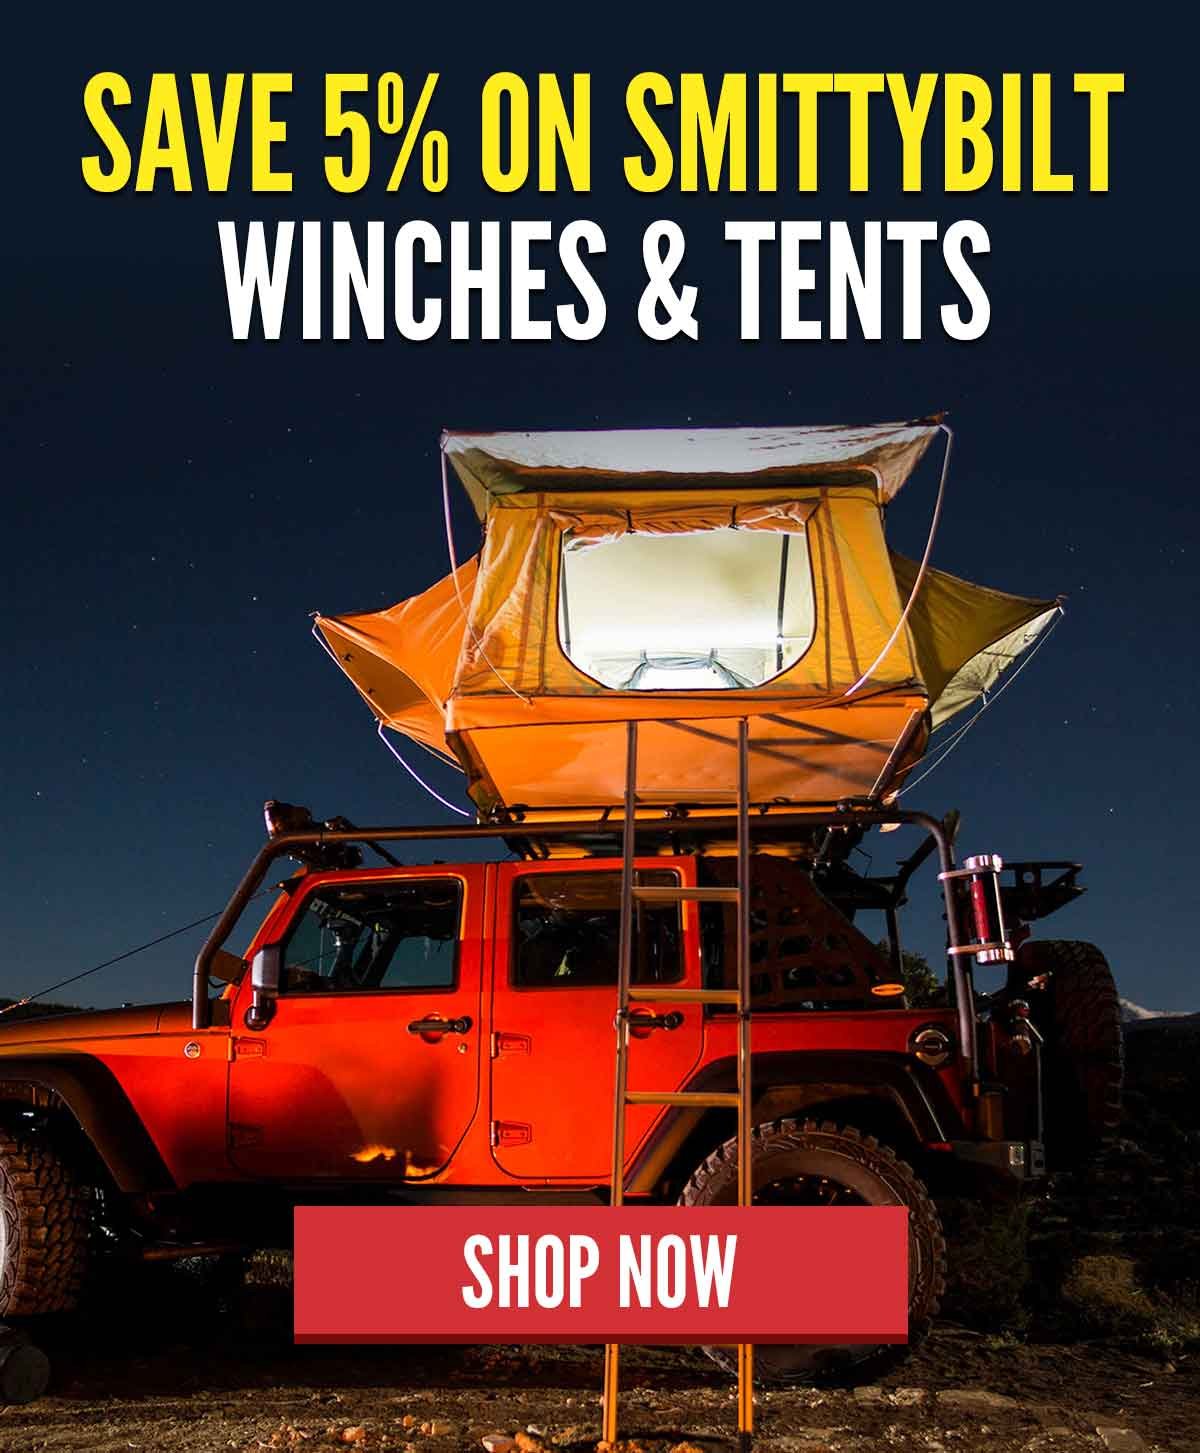 Save 5% On Smittybilt Winches & Tents